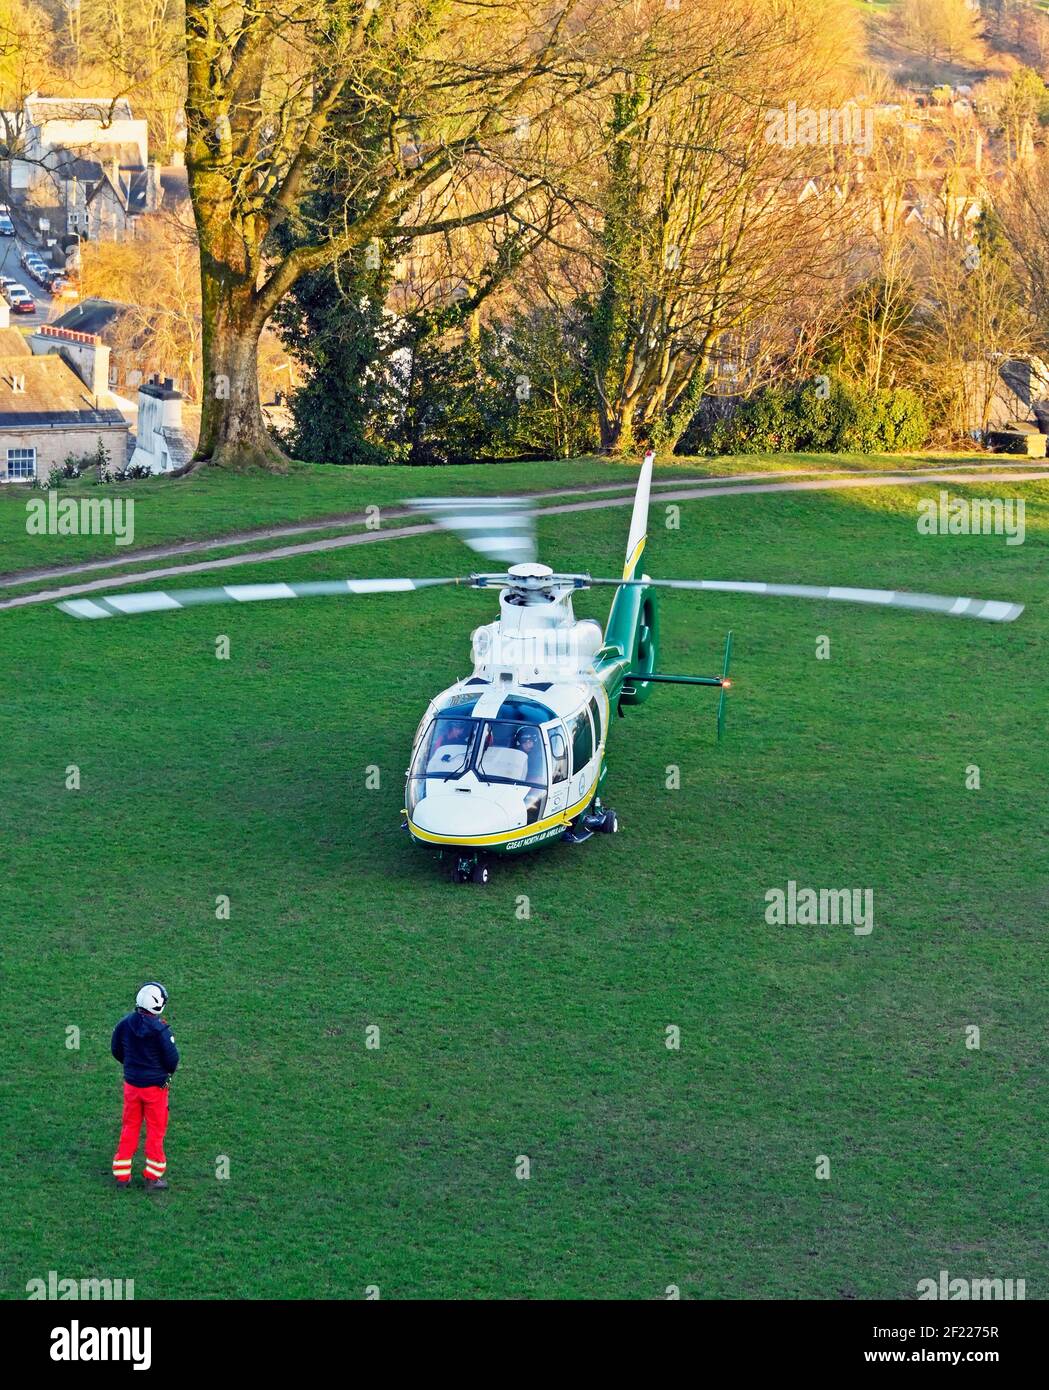 Great Northern Air Ambulance Service Helicopter, Eurocopter AS365 Dauphin N2, registrazione G-NHAC. Bowling Fell, Kendal, Cumbria, Inghilterra, Regno Unito Foto Stock